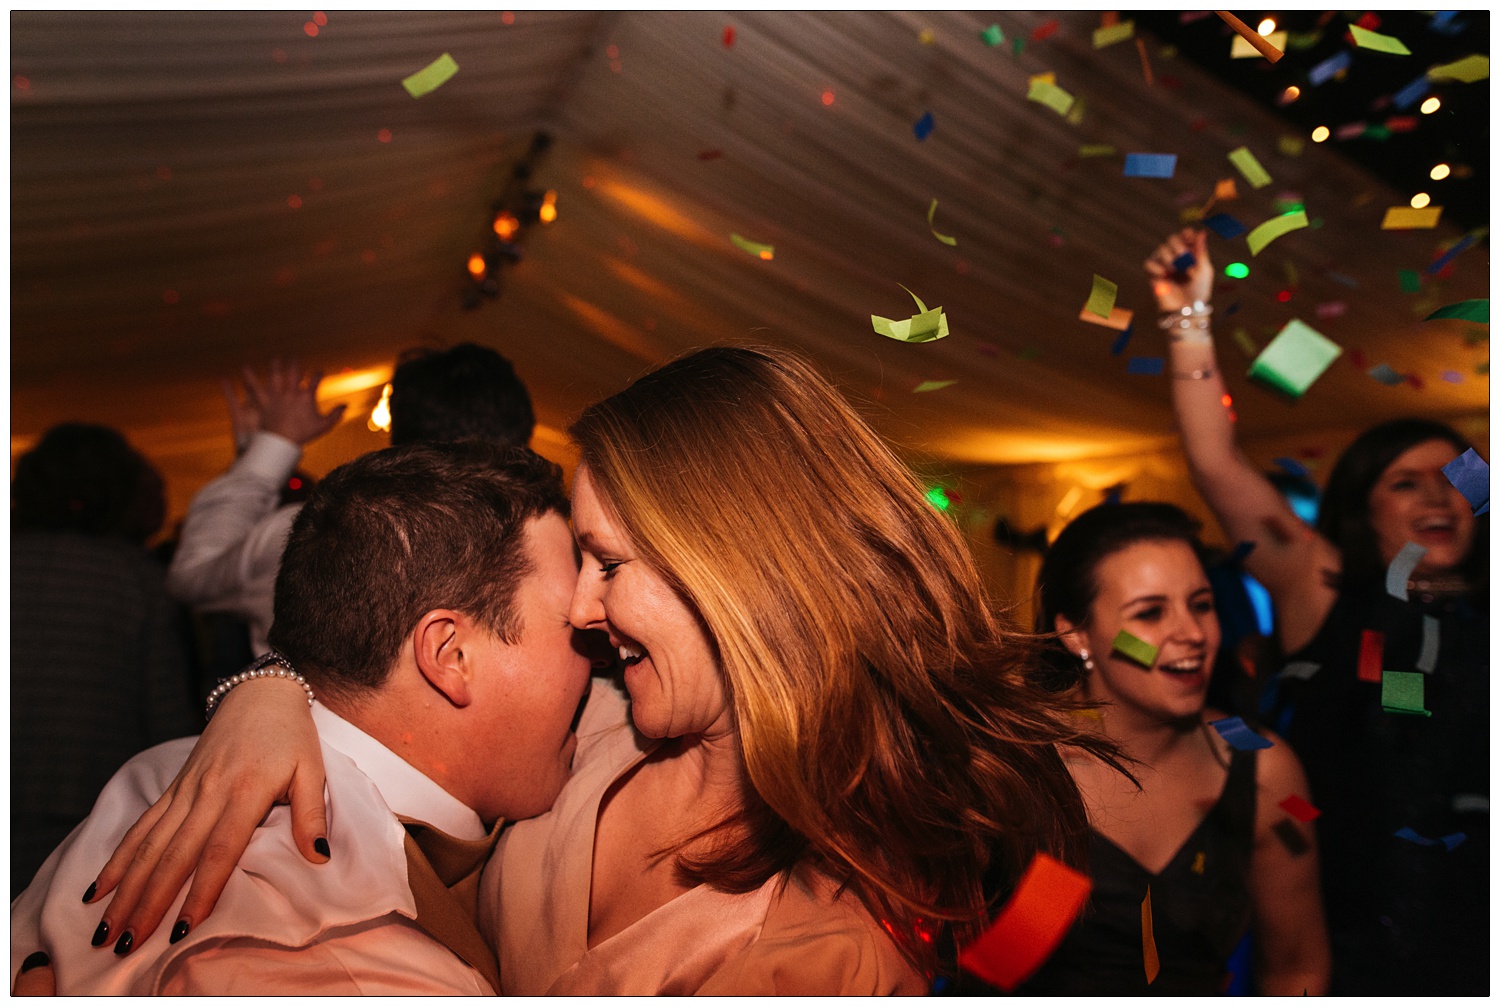 A man and woman dance together as coloured confetti falls from the air at a wedding reception.